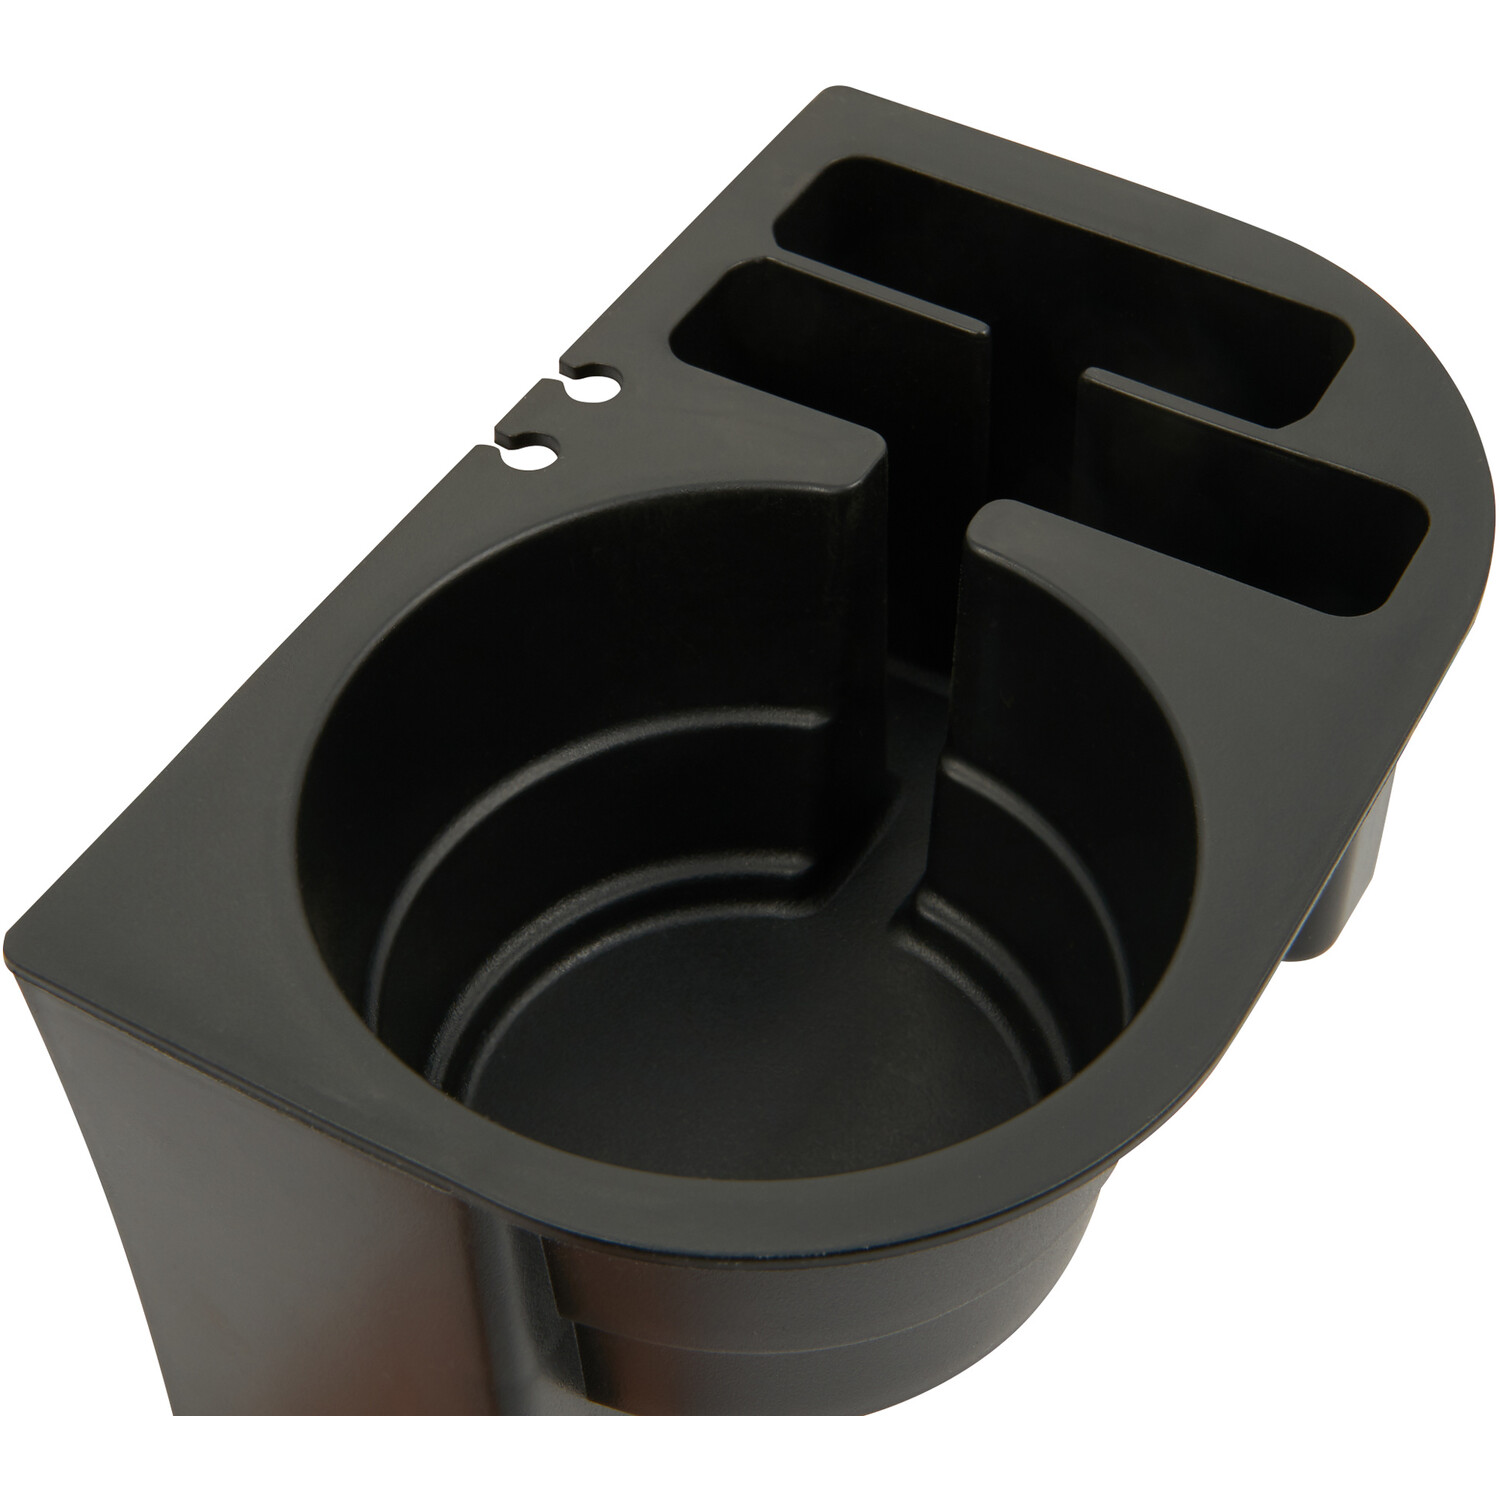 Carkit Device Organiser with Cup Holder Image 5